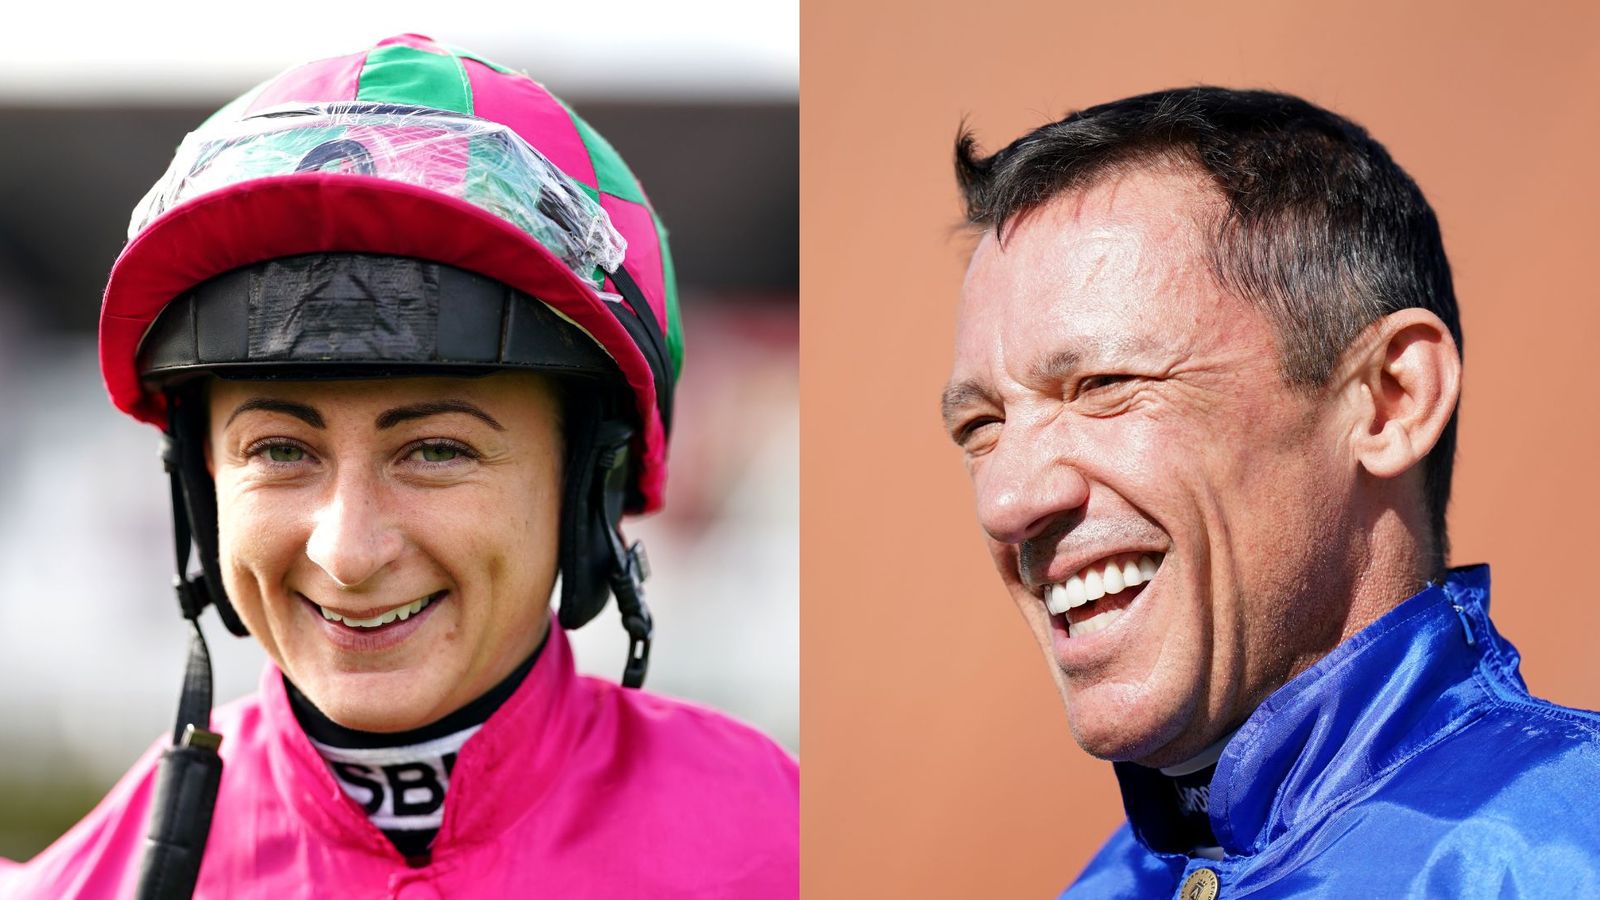 Racing League 2022: Team competition returns live on Sky Sports Racing featuring Frankie Dettori for Wales and The West